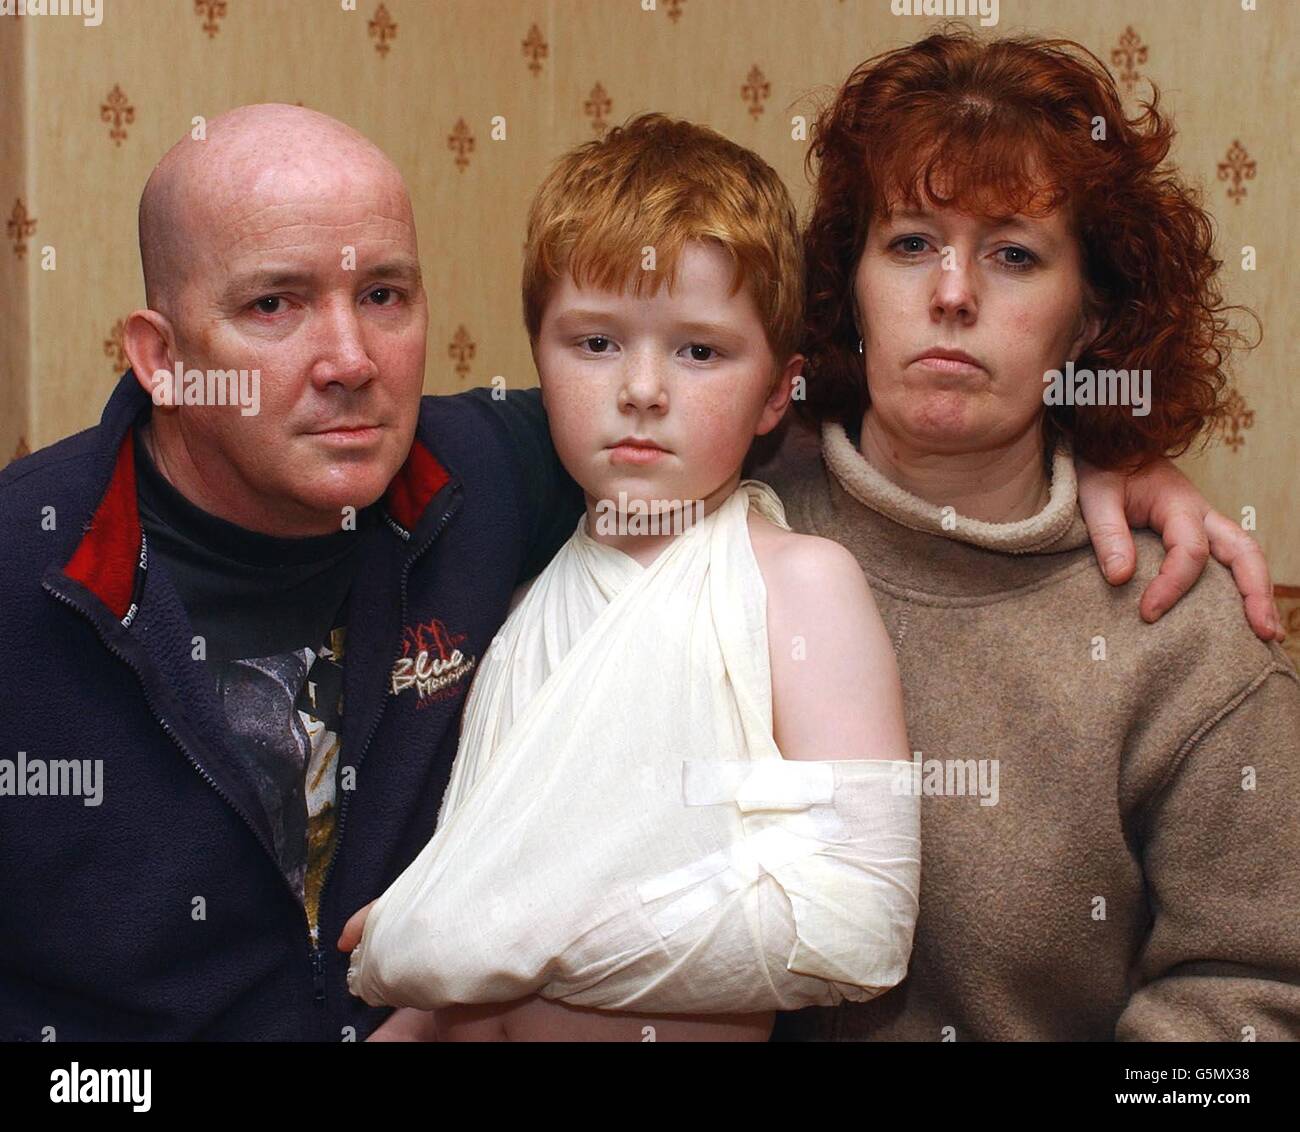 Josh Campbell, of Wallsend, Newcastle-upon-Tyne, photographed at his home with his mother Valerie and father Paul. The mother of a nine-year-old boy who was sent home from hospital by doctors who failed to spot his broken collarbone launched an attack. * on the NHS. Josh Campbell, of Wallsend, Newcastle-upon-Tyne, was left in agony after staff at North Tyneside Hospital refused to X-ray his shoulder after a playground fall. Stock Photo